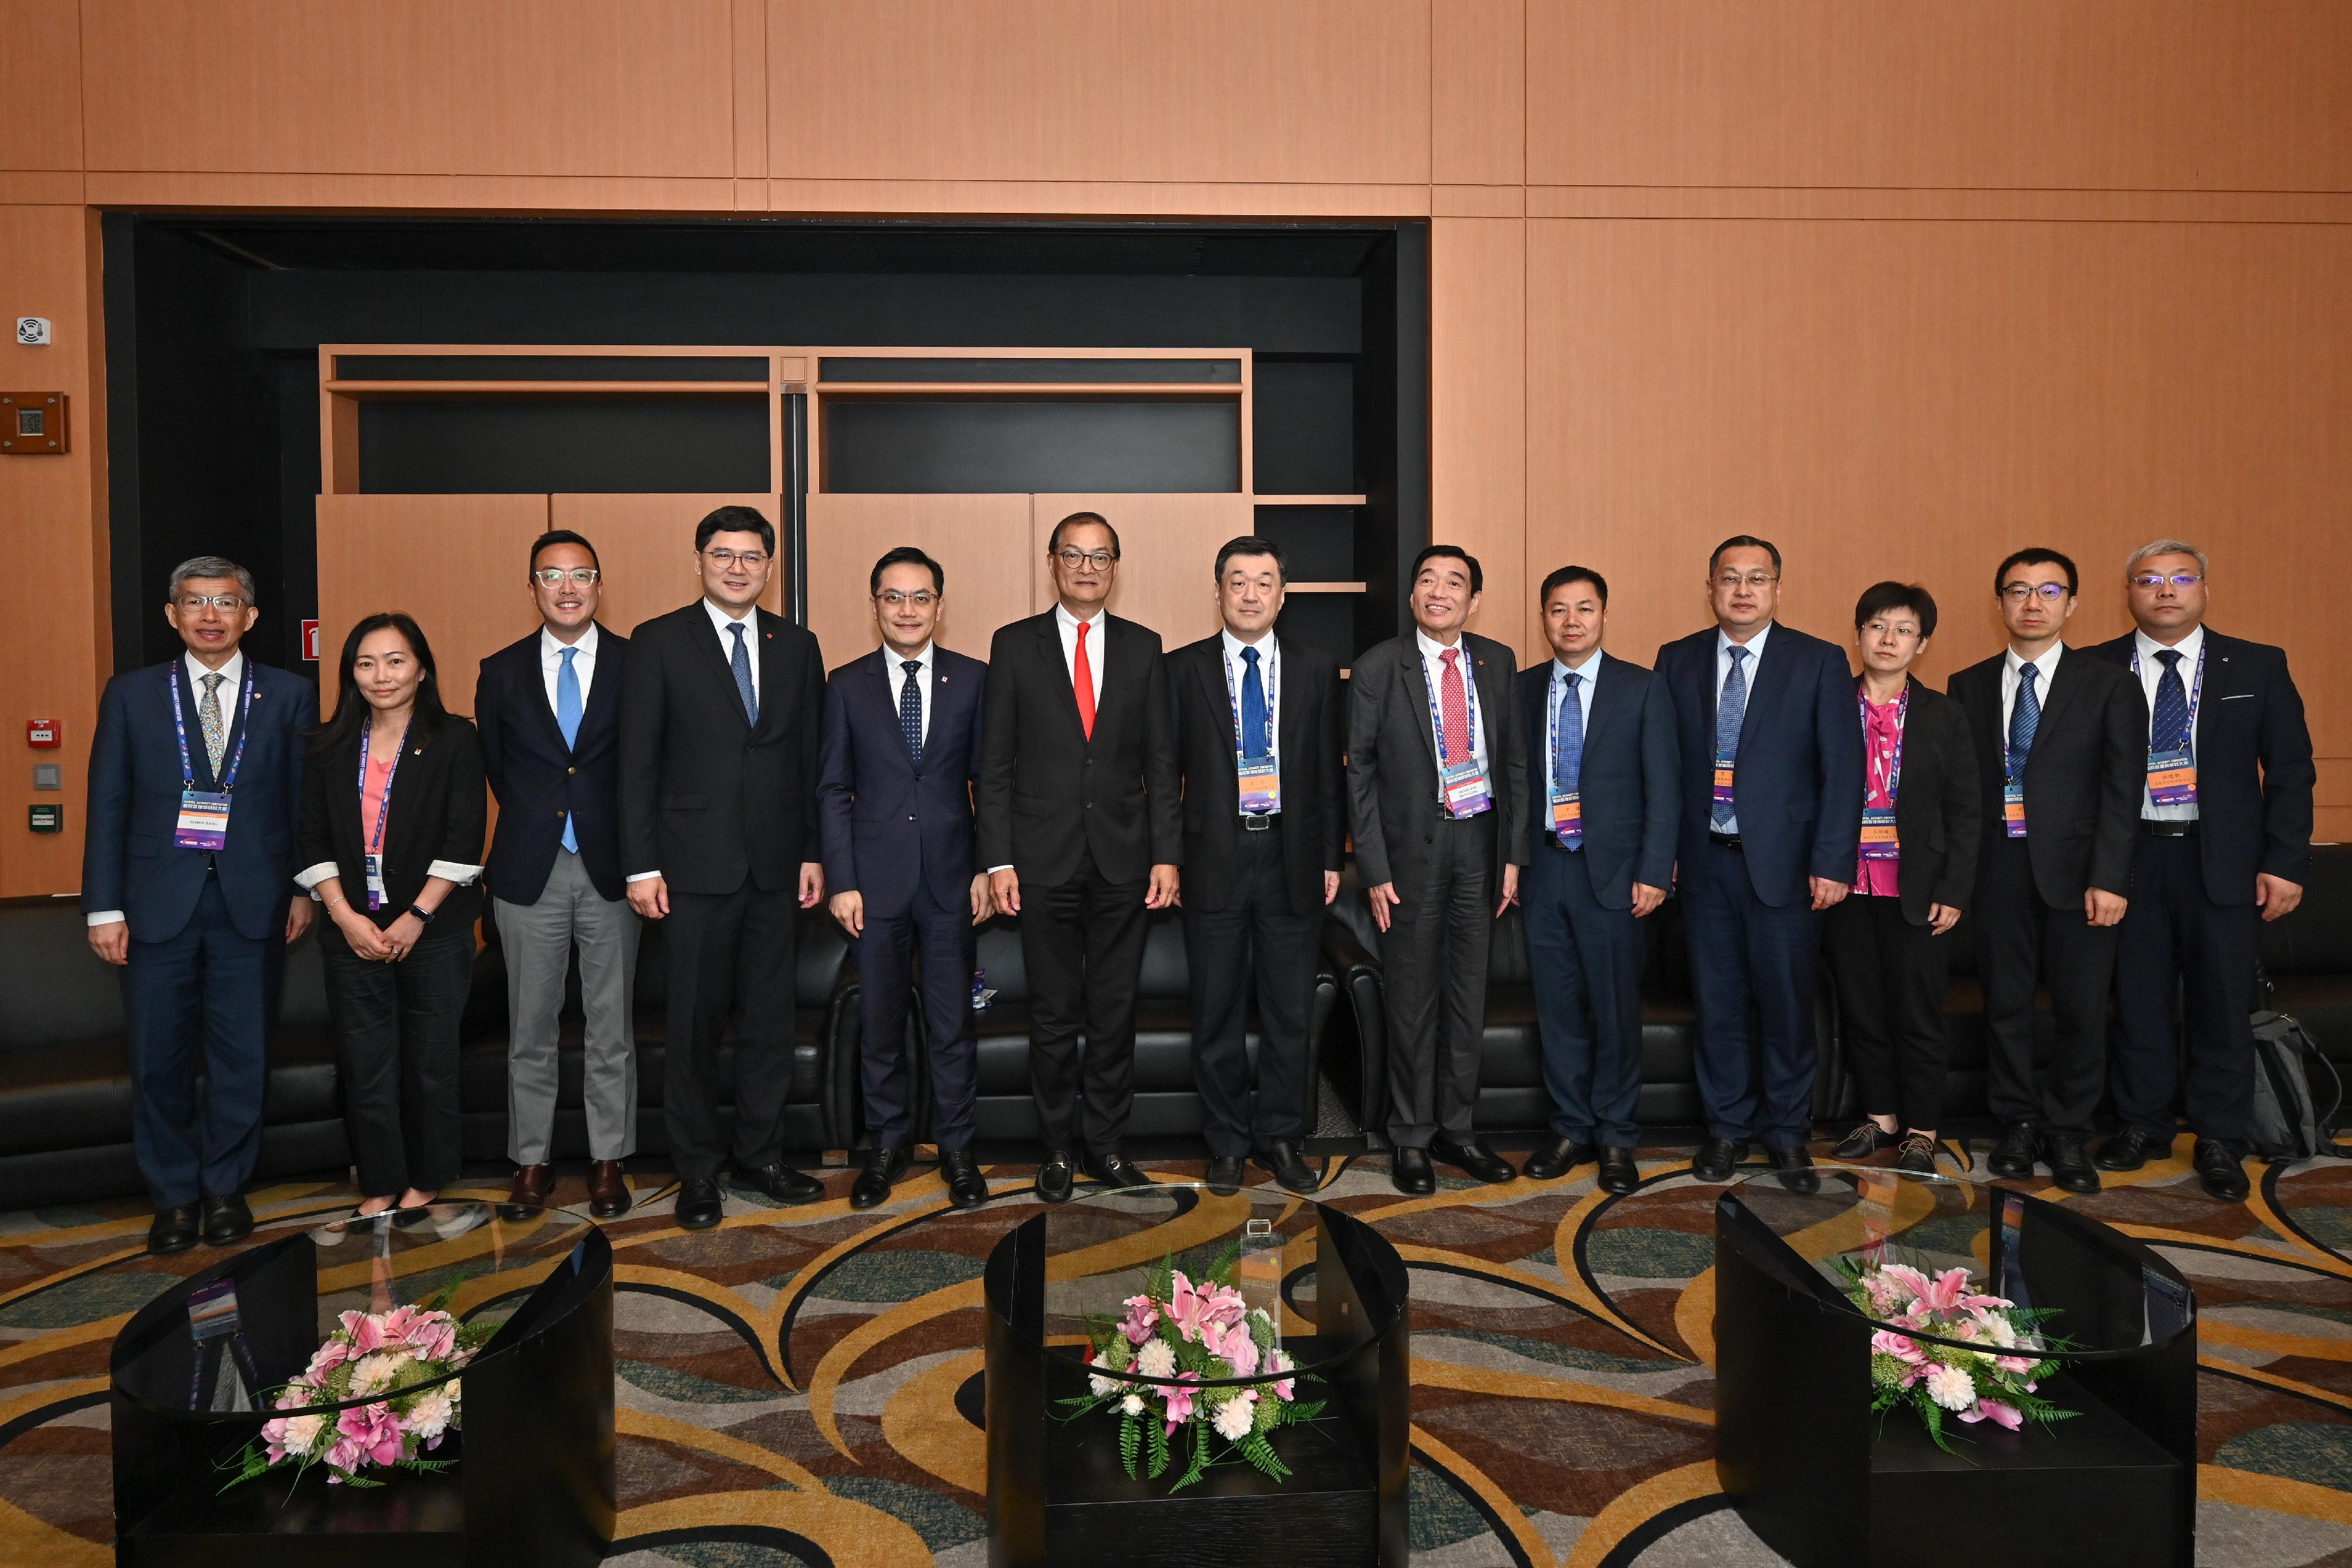 The Secretary for Health, Professor Lo Chung-mau, met with a delegation led by Deputy Director of the Beijing Municipal Health Commission Mr Li Ang today (May 16) to explore ways of strengthening co-operation in the area of healthcare. Photo shows Professor Lo (sixth left); Mr Li Ang (seventh right); the Director of Health, Dr Ronald Lam (fifth left); the Chairman of the Hospital Authority (HA), Mr Henry Fan (sixth right); the Chief Executive of the HA, Dr Tony Ko (fourth left), with other attendees of the meeting.